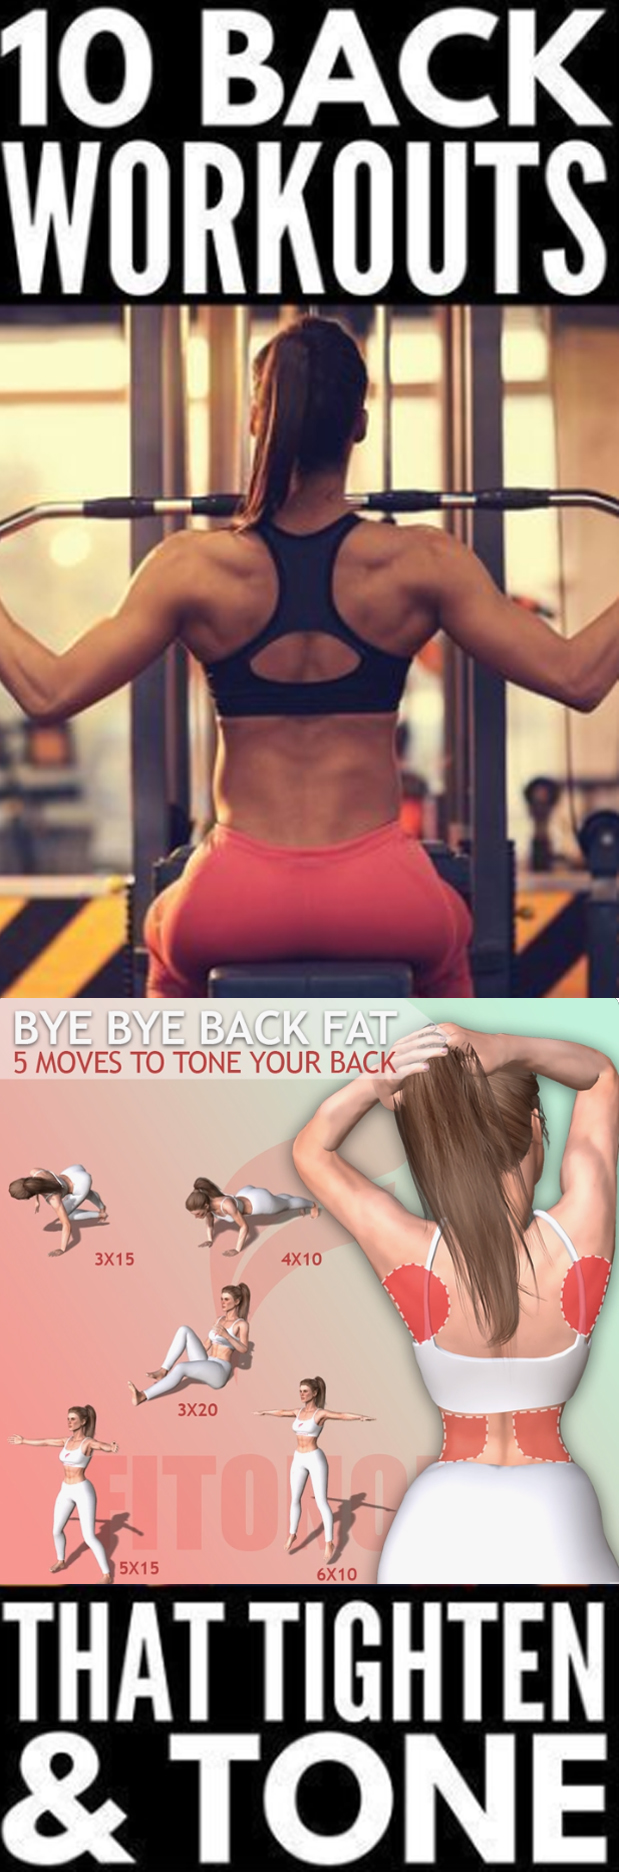 Fat tone your back